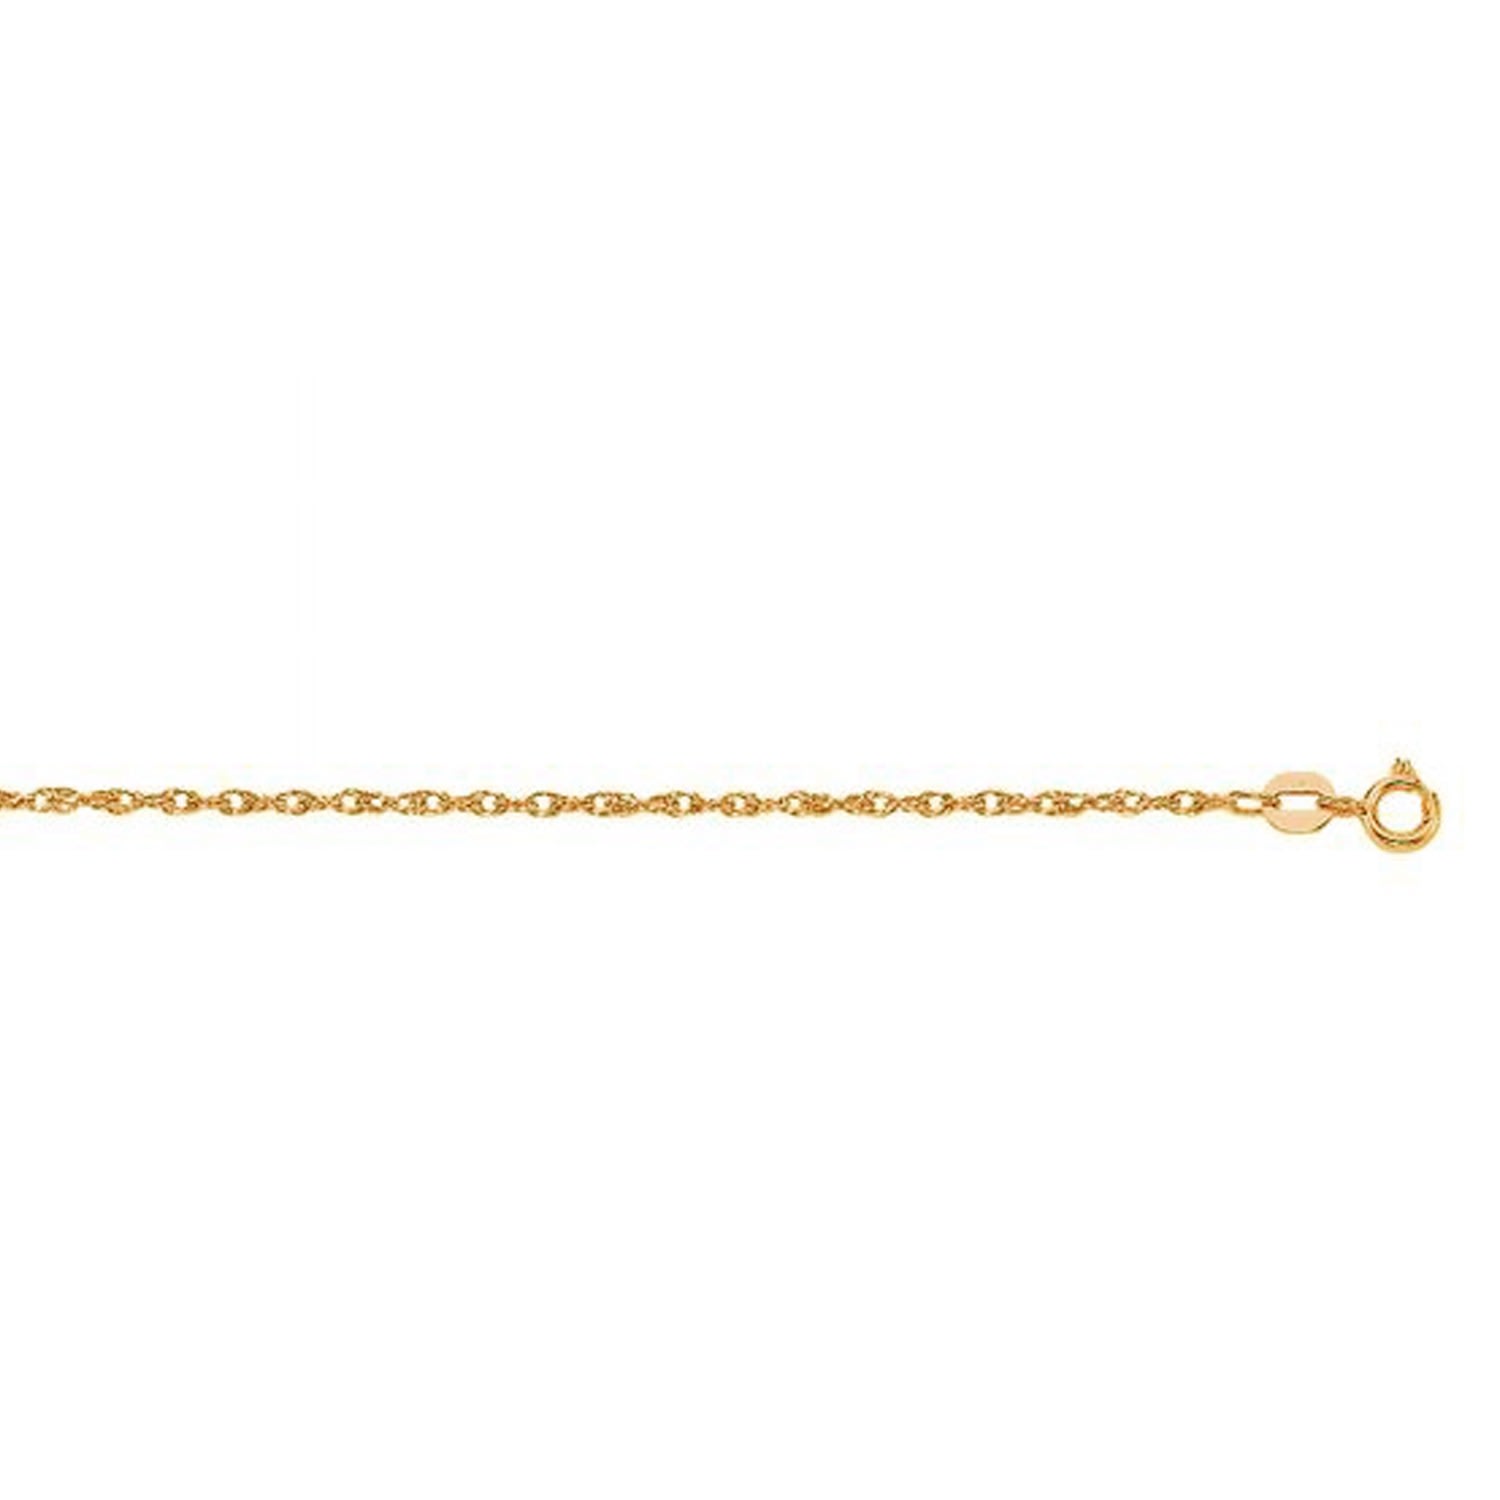 Men’s 14K Gold Diamond Cut Carded Rope Chain Necklace - Short Undefined Jewelry